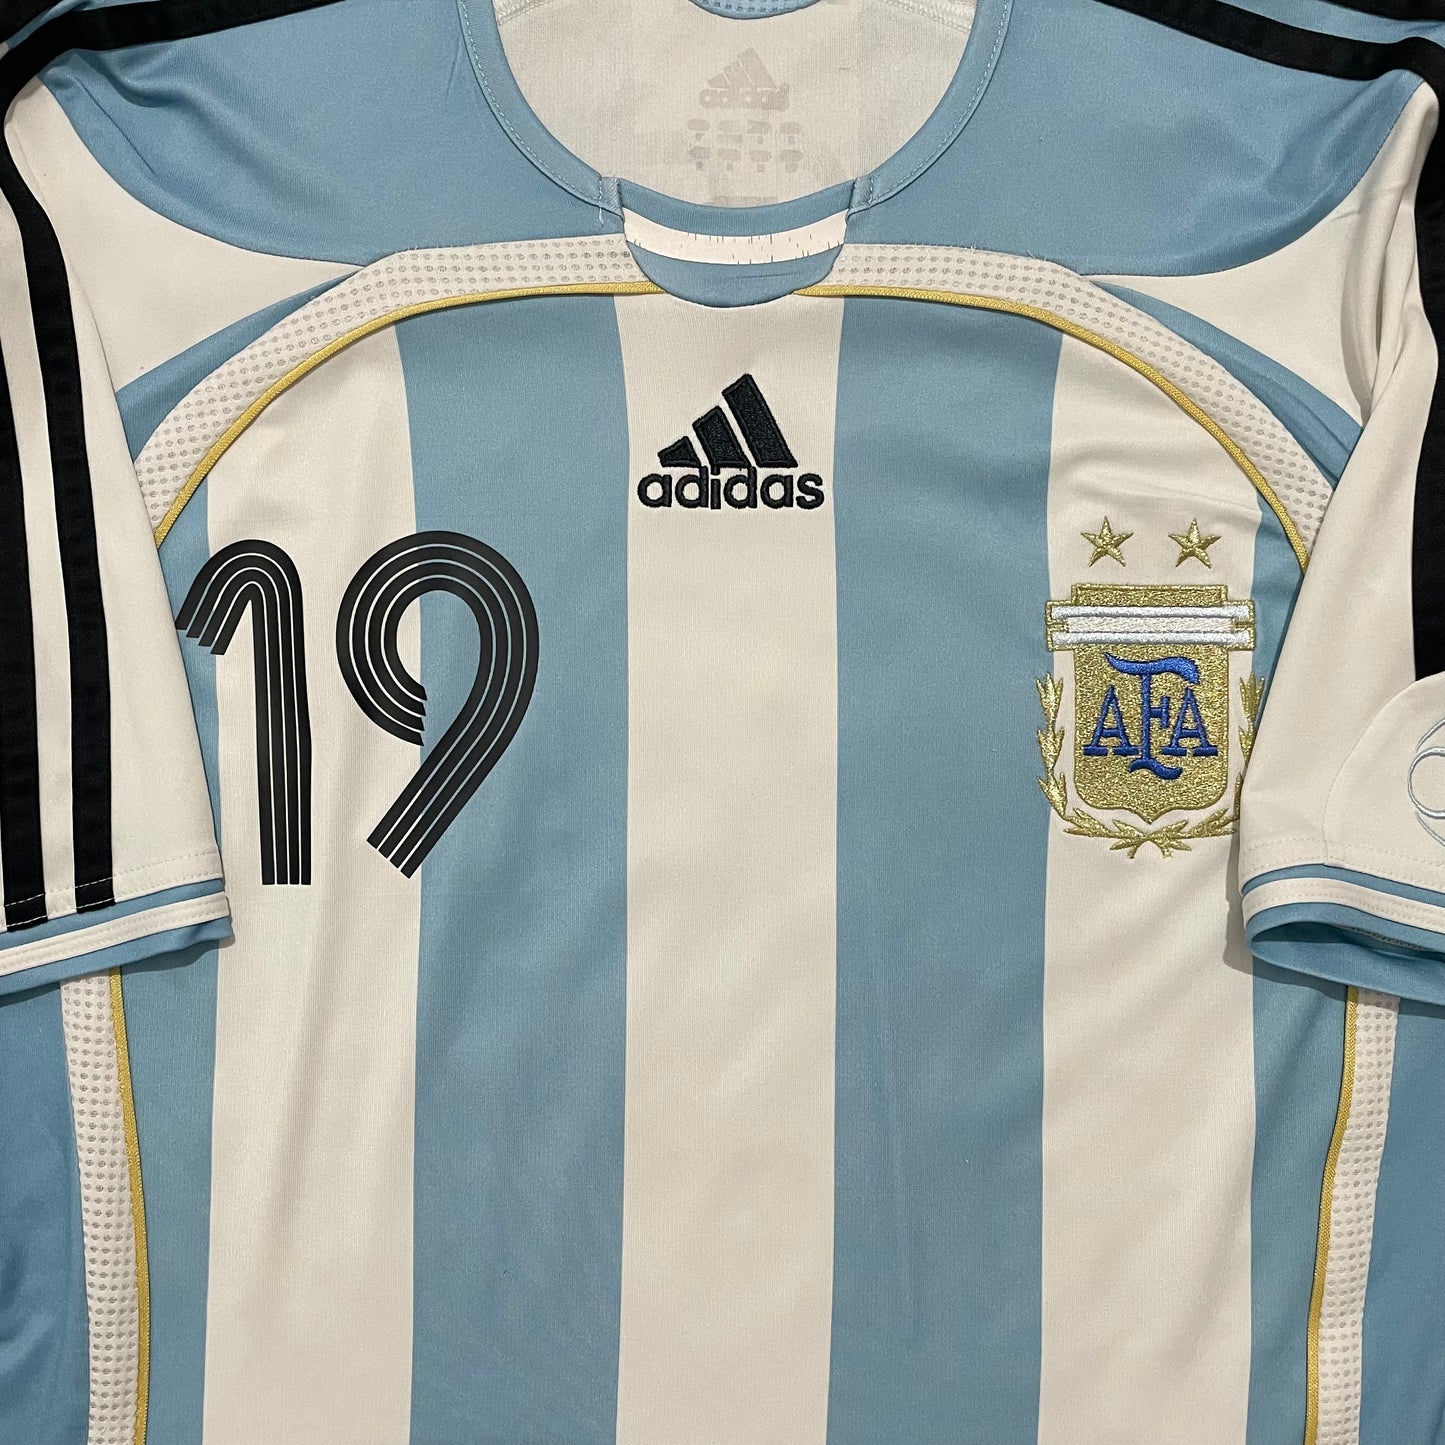 2006 World Cup Argentina home shirt #19 Messi (M)